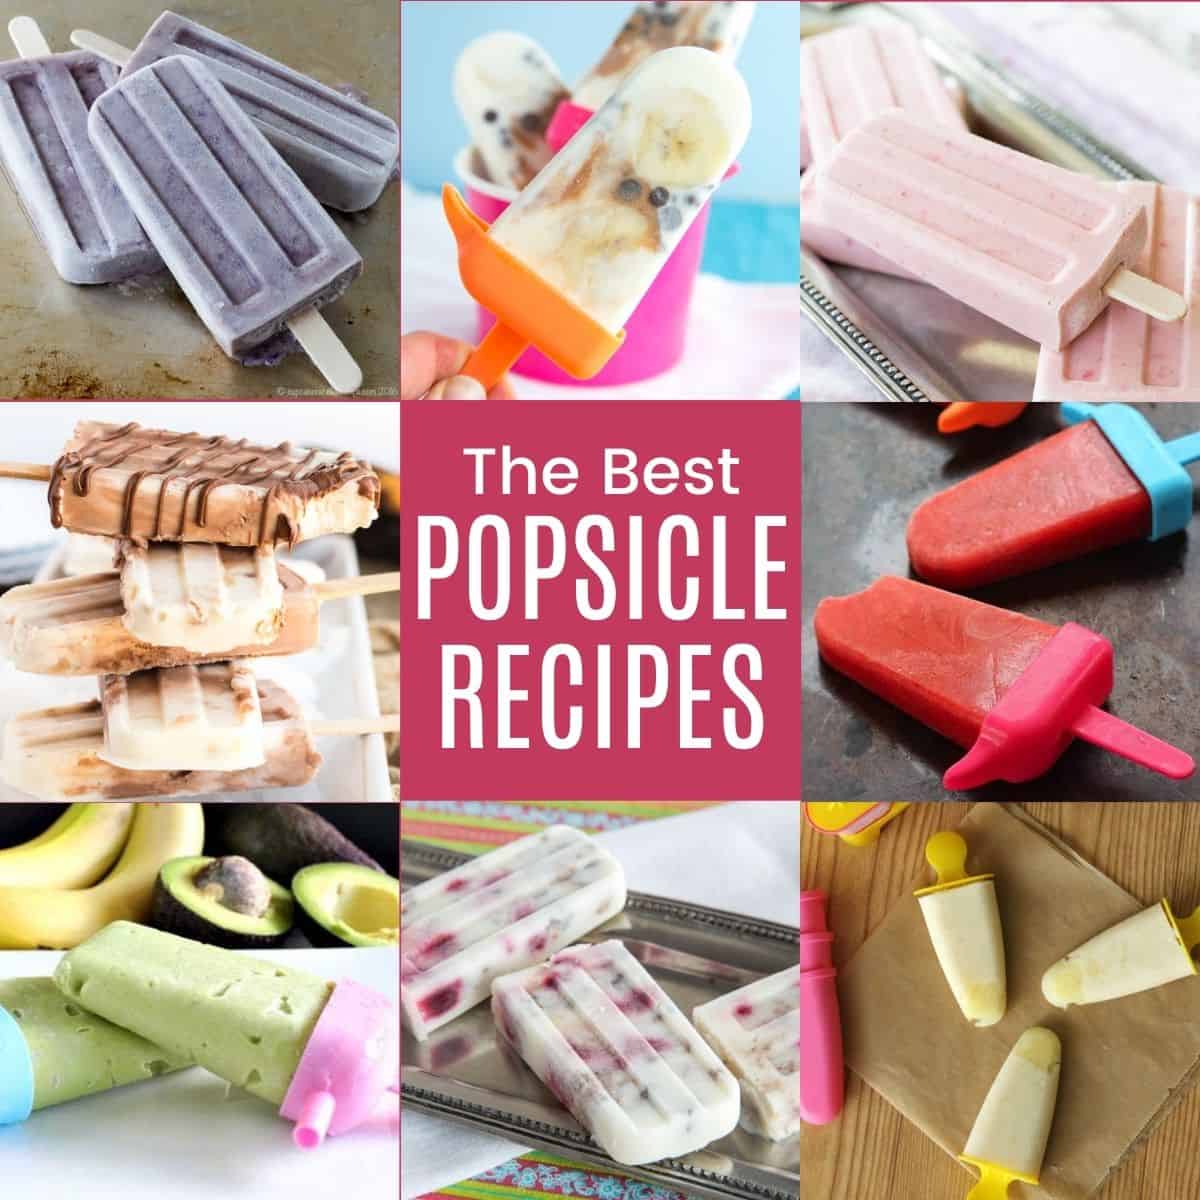 https://cupcakesandkalechips.com/wp-content/uploads/2022/07/Popsicle-Recipes-Featured.jpeg